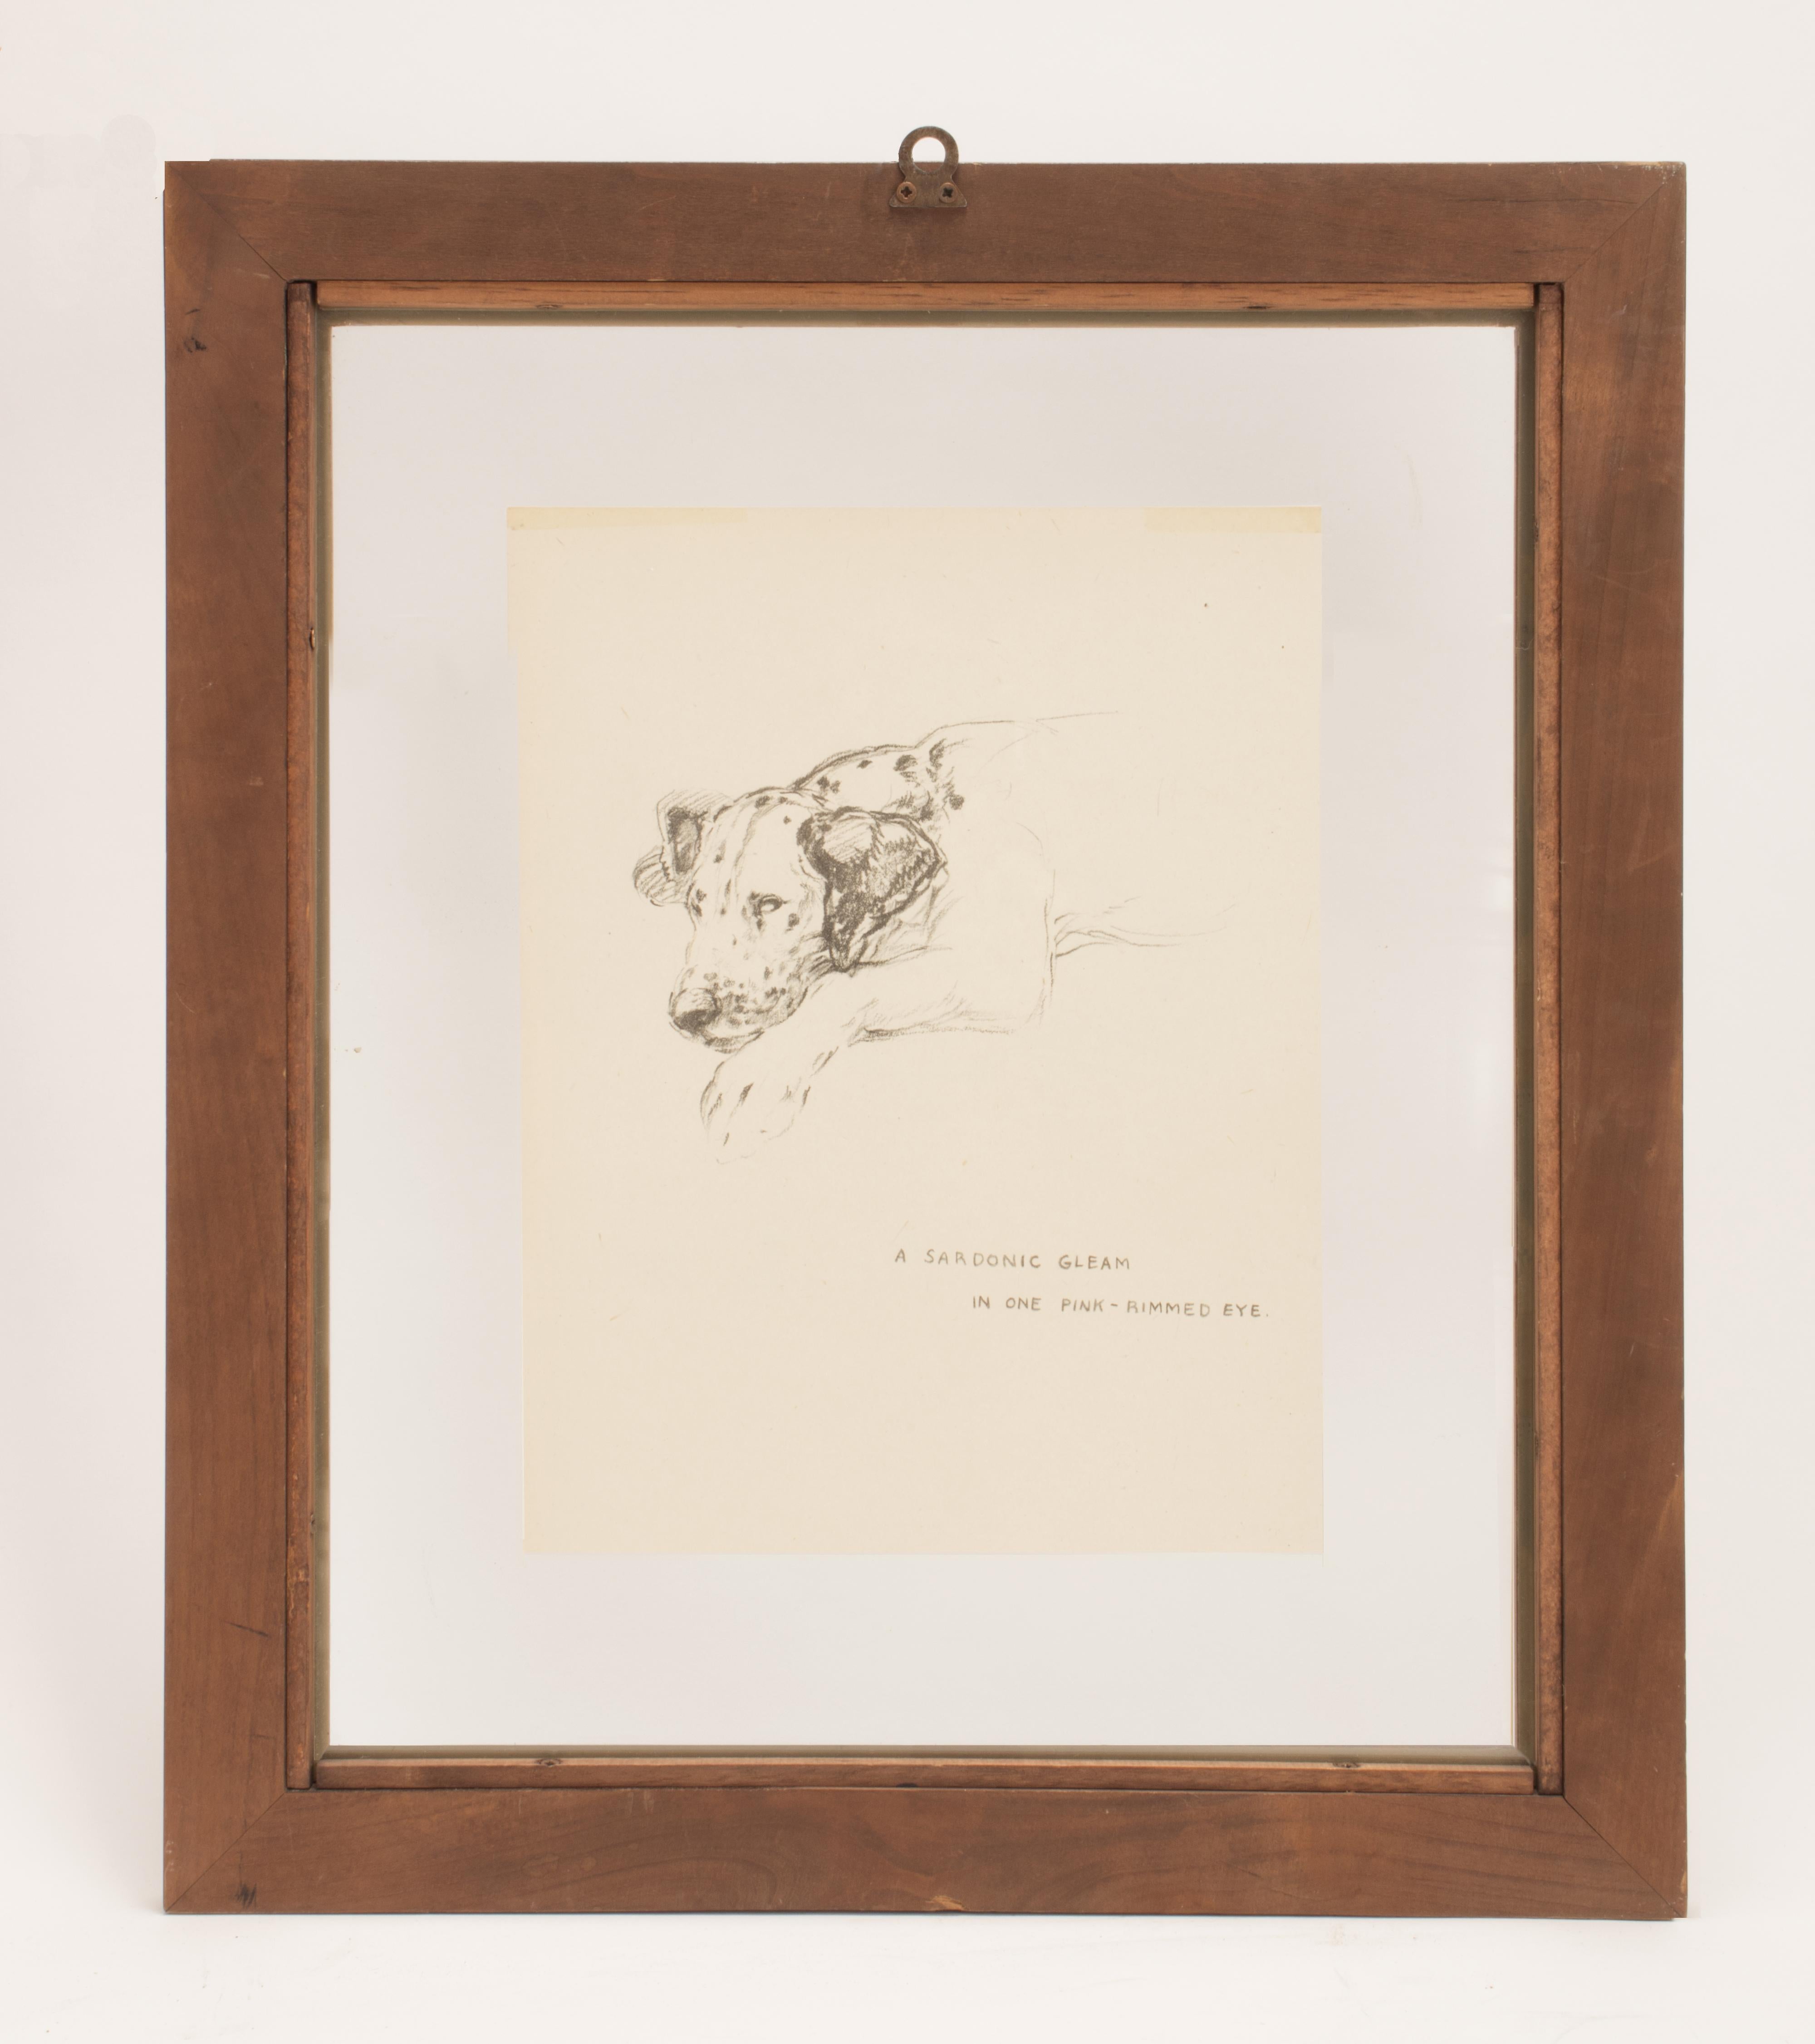 A pencil drawing on paper depicting on both sides the Dalmatian dog lying on an armchair. On the one hand, the egoist, on the other, a sardonic gleam in one pink rimmed eye. Solid cherry wood frame, polished and beeswaxed. USA circa 1940.